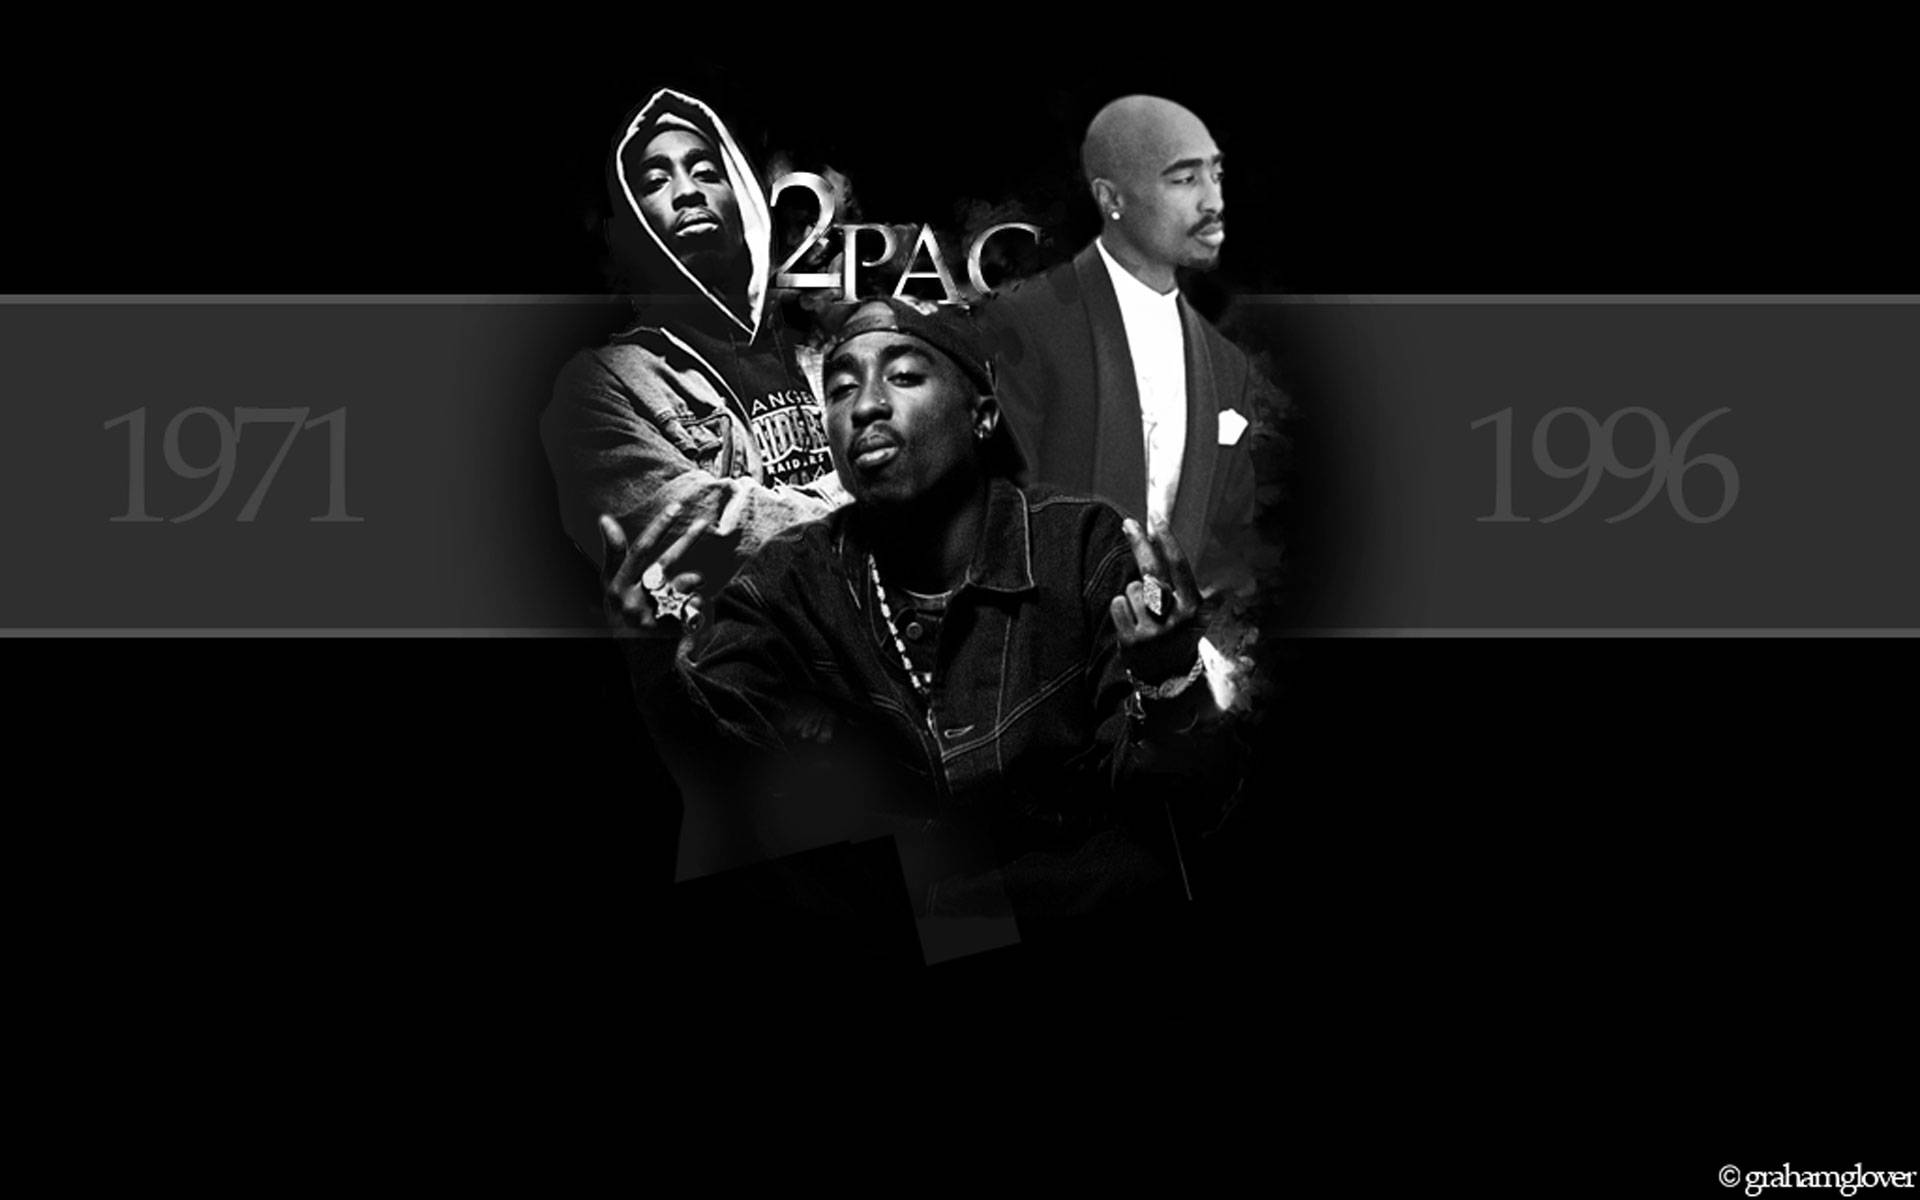 2Pac Shakur Rest In Peace Photo Wallpaper   2pac Wallpaper